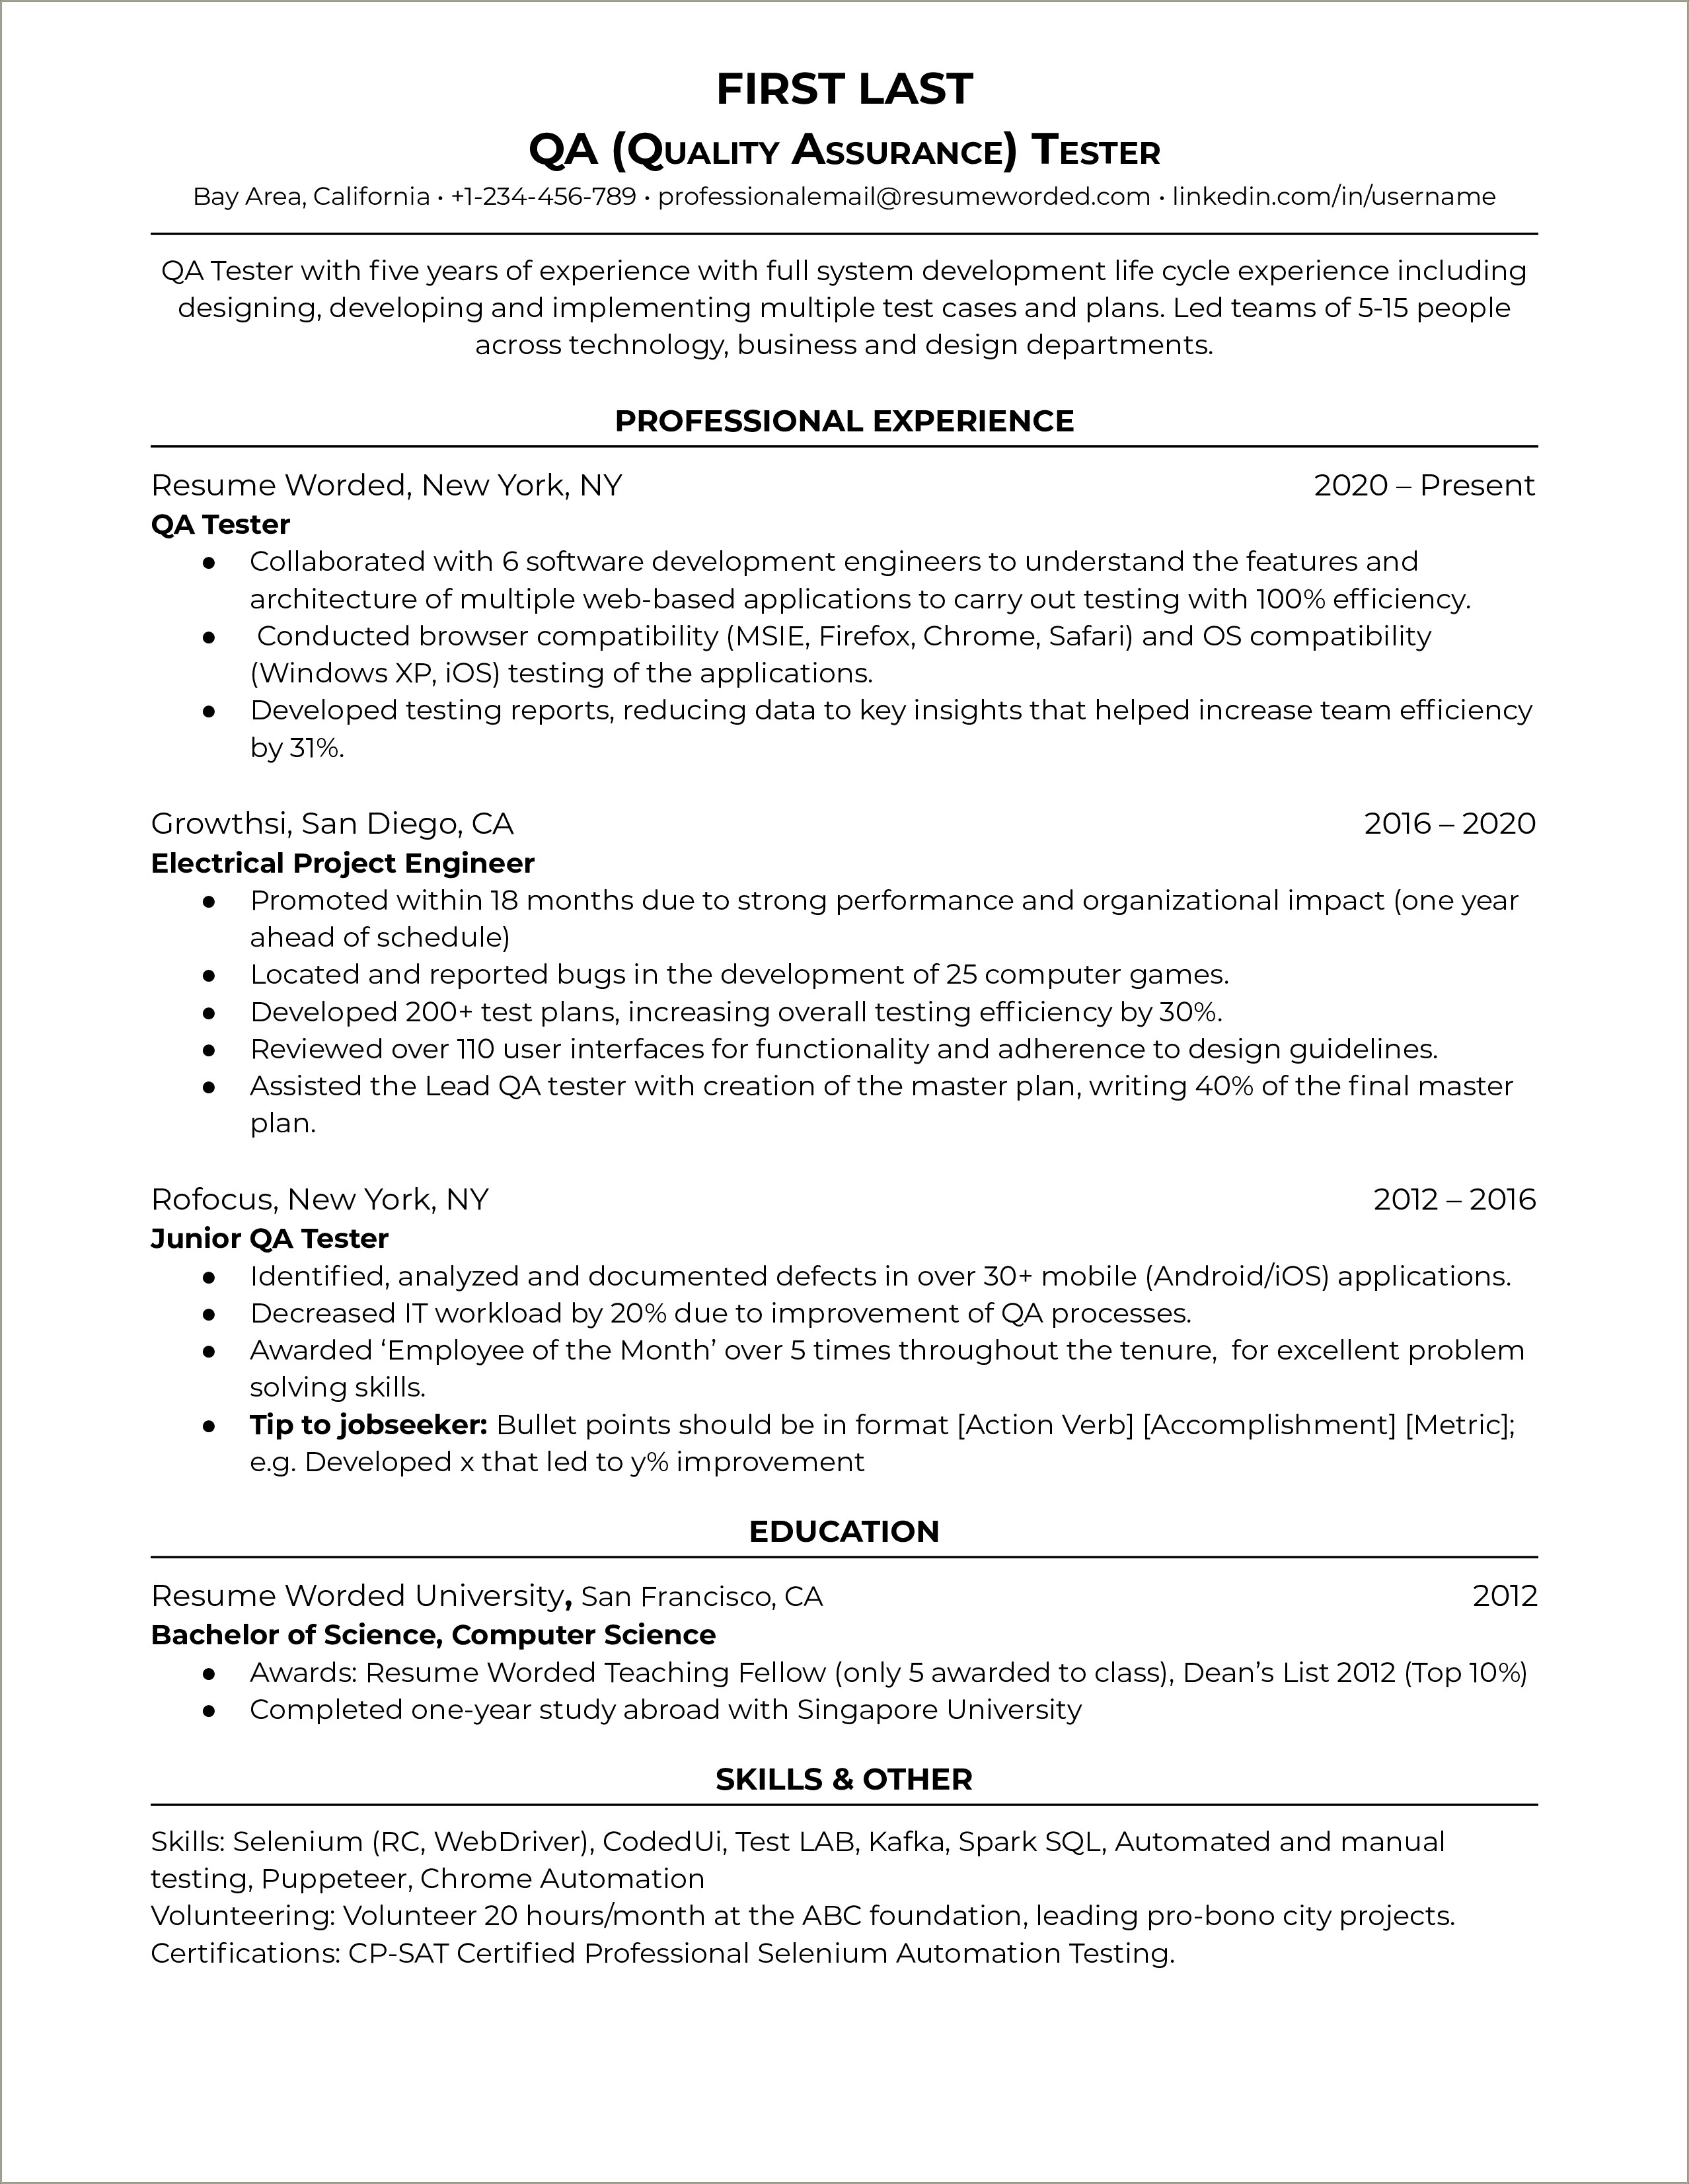 Automation Testing Experience Resume Sample